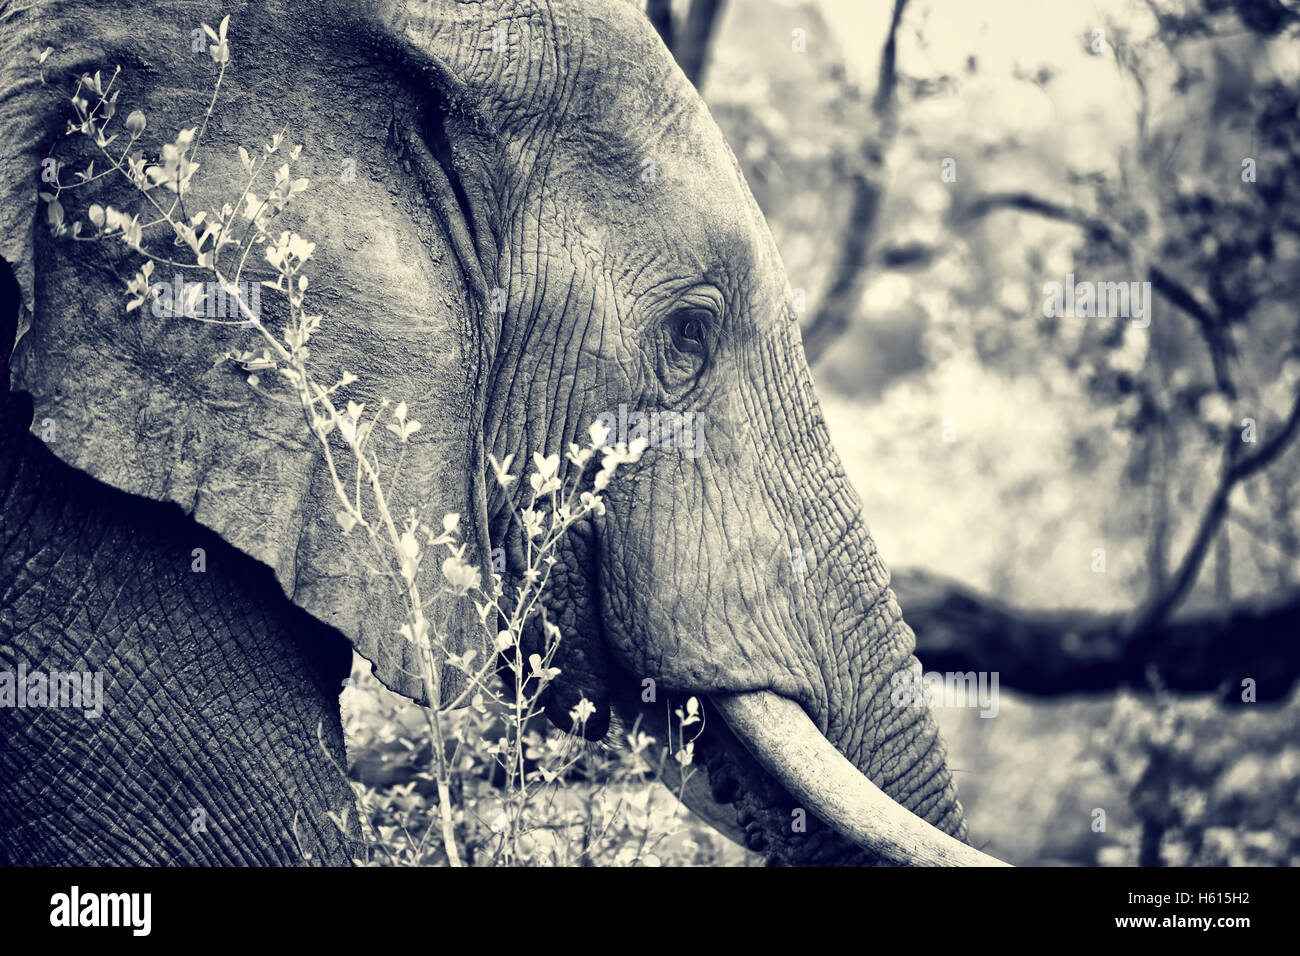 Side view portrait of big beautiful elephant outdoors, black and white photo of the wild animal, safari game drive Stock Photo